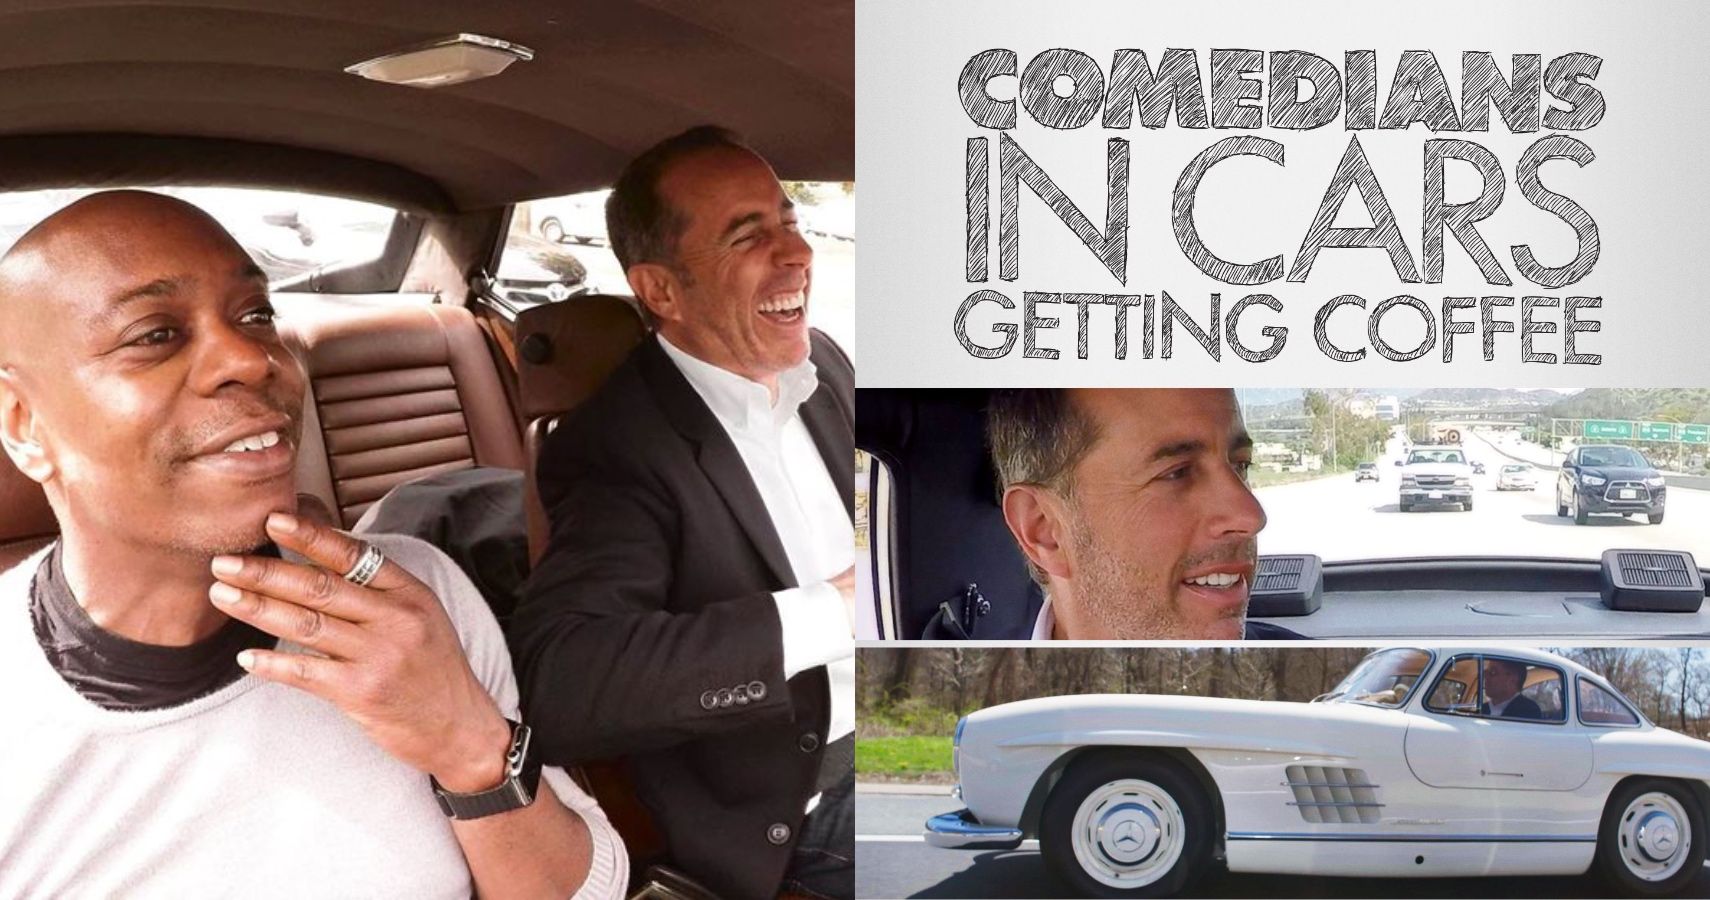 Top 10 Netflix’s Comedians In Cars Getting Coffee Episodes Ranked (according to IMDb)